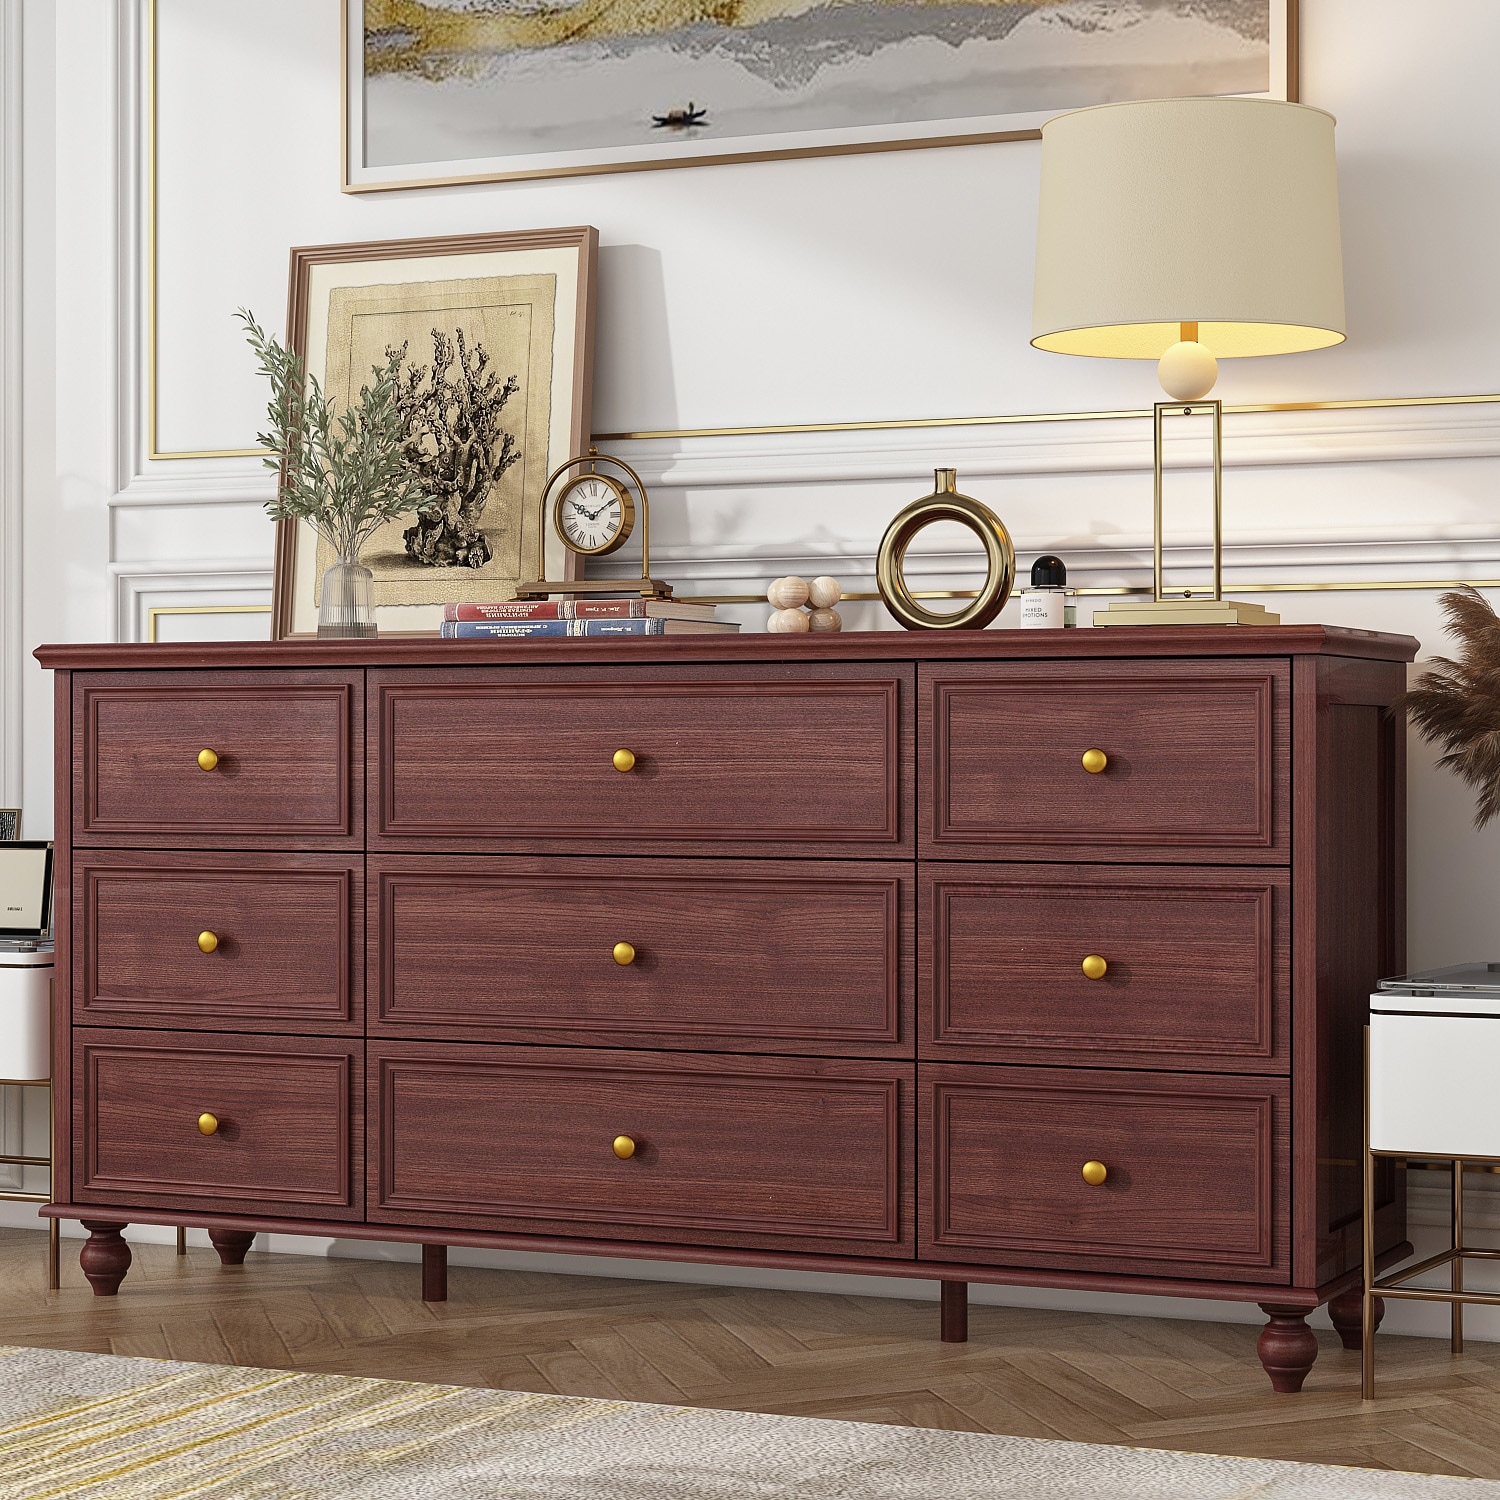 https://ak1.ostkcdn.com/images/products/is/images/direct/b2f53f9d2336f6a051b1c41d263538c0e8c428bb/Modern-Wood-Dresser-Bedroom-Storage-Drawer-Organizer-Closet-Drawers.jpg